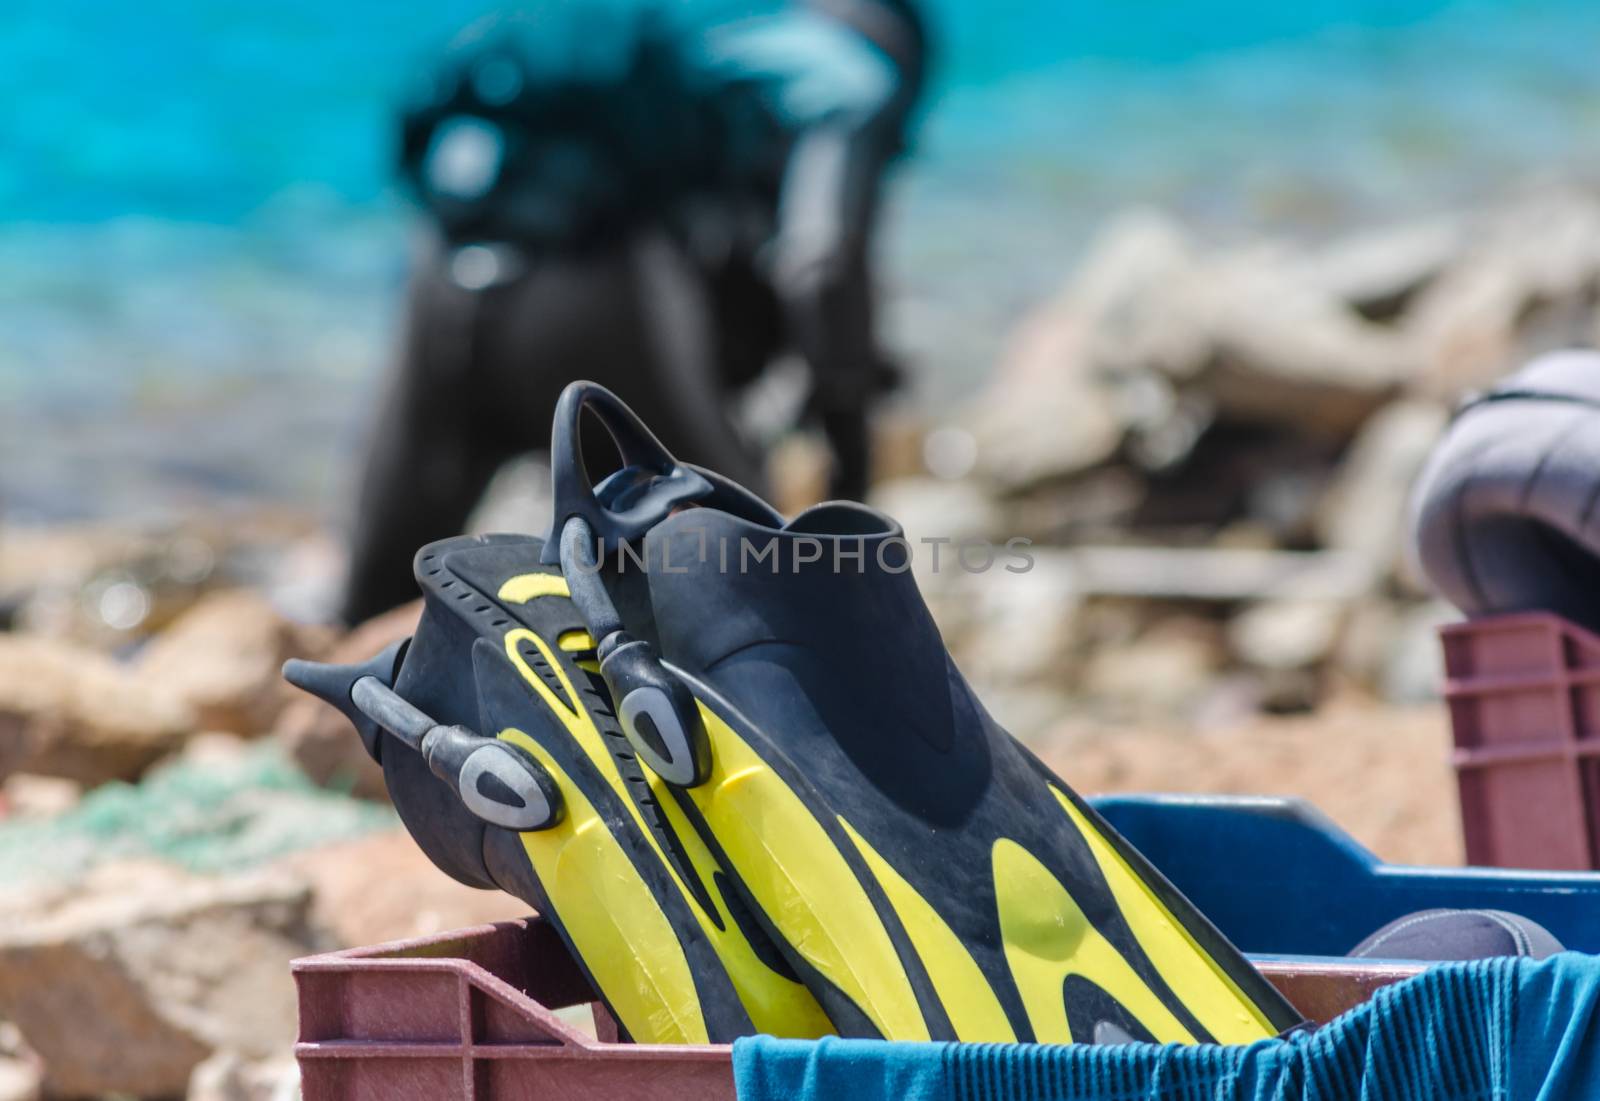 diving equipment in a crate on the beach in Egypt